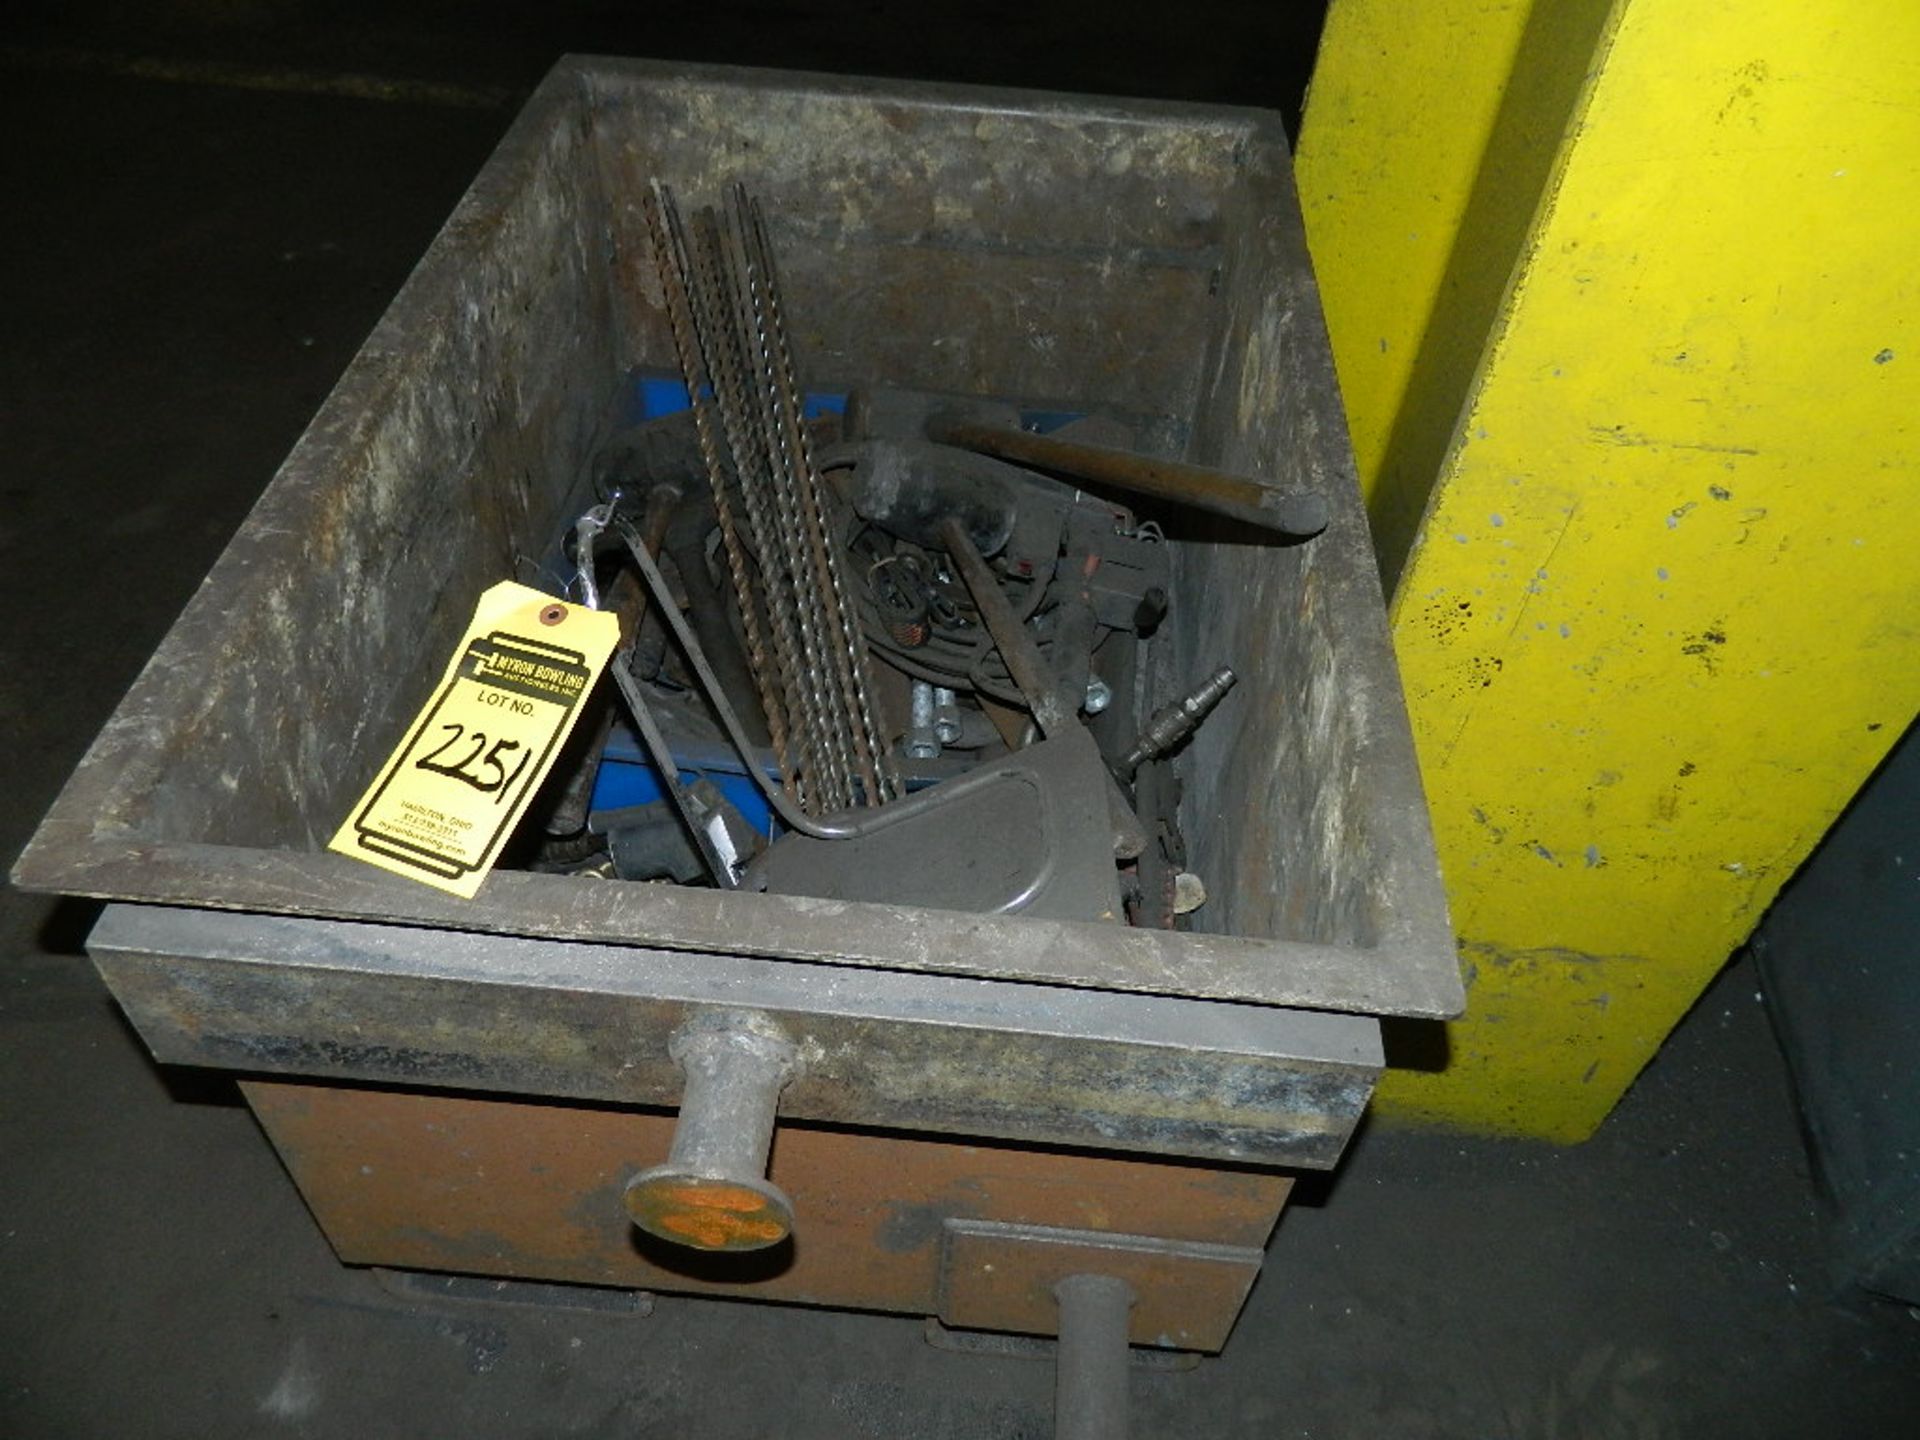 METAL TUB WITH DRILLS & TOOLS